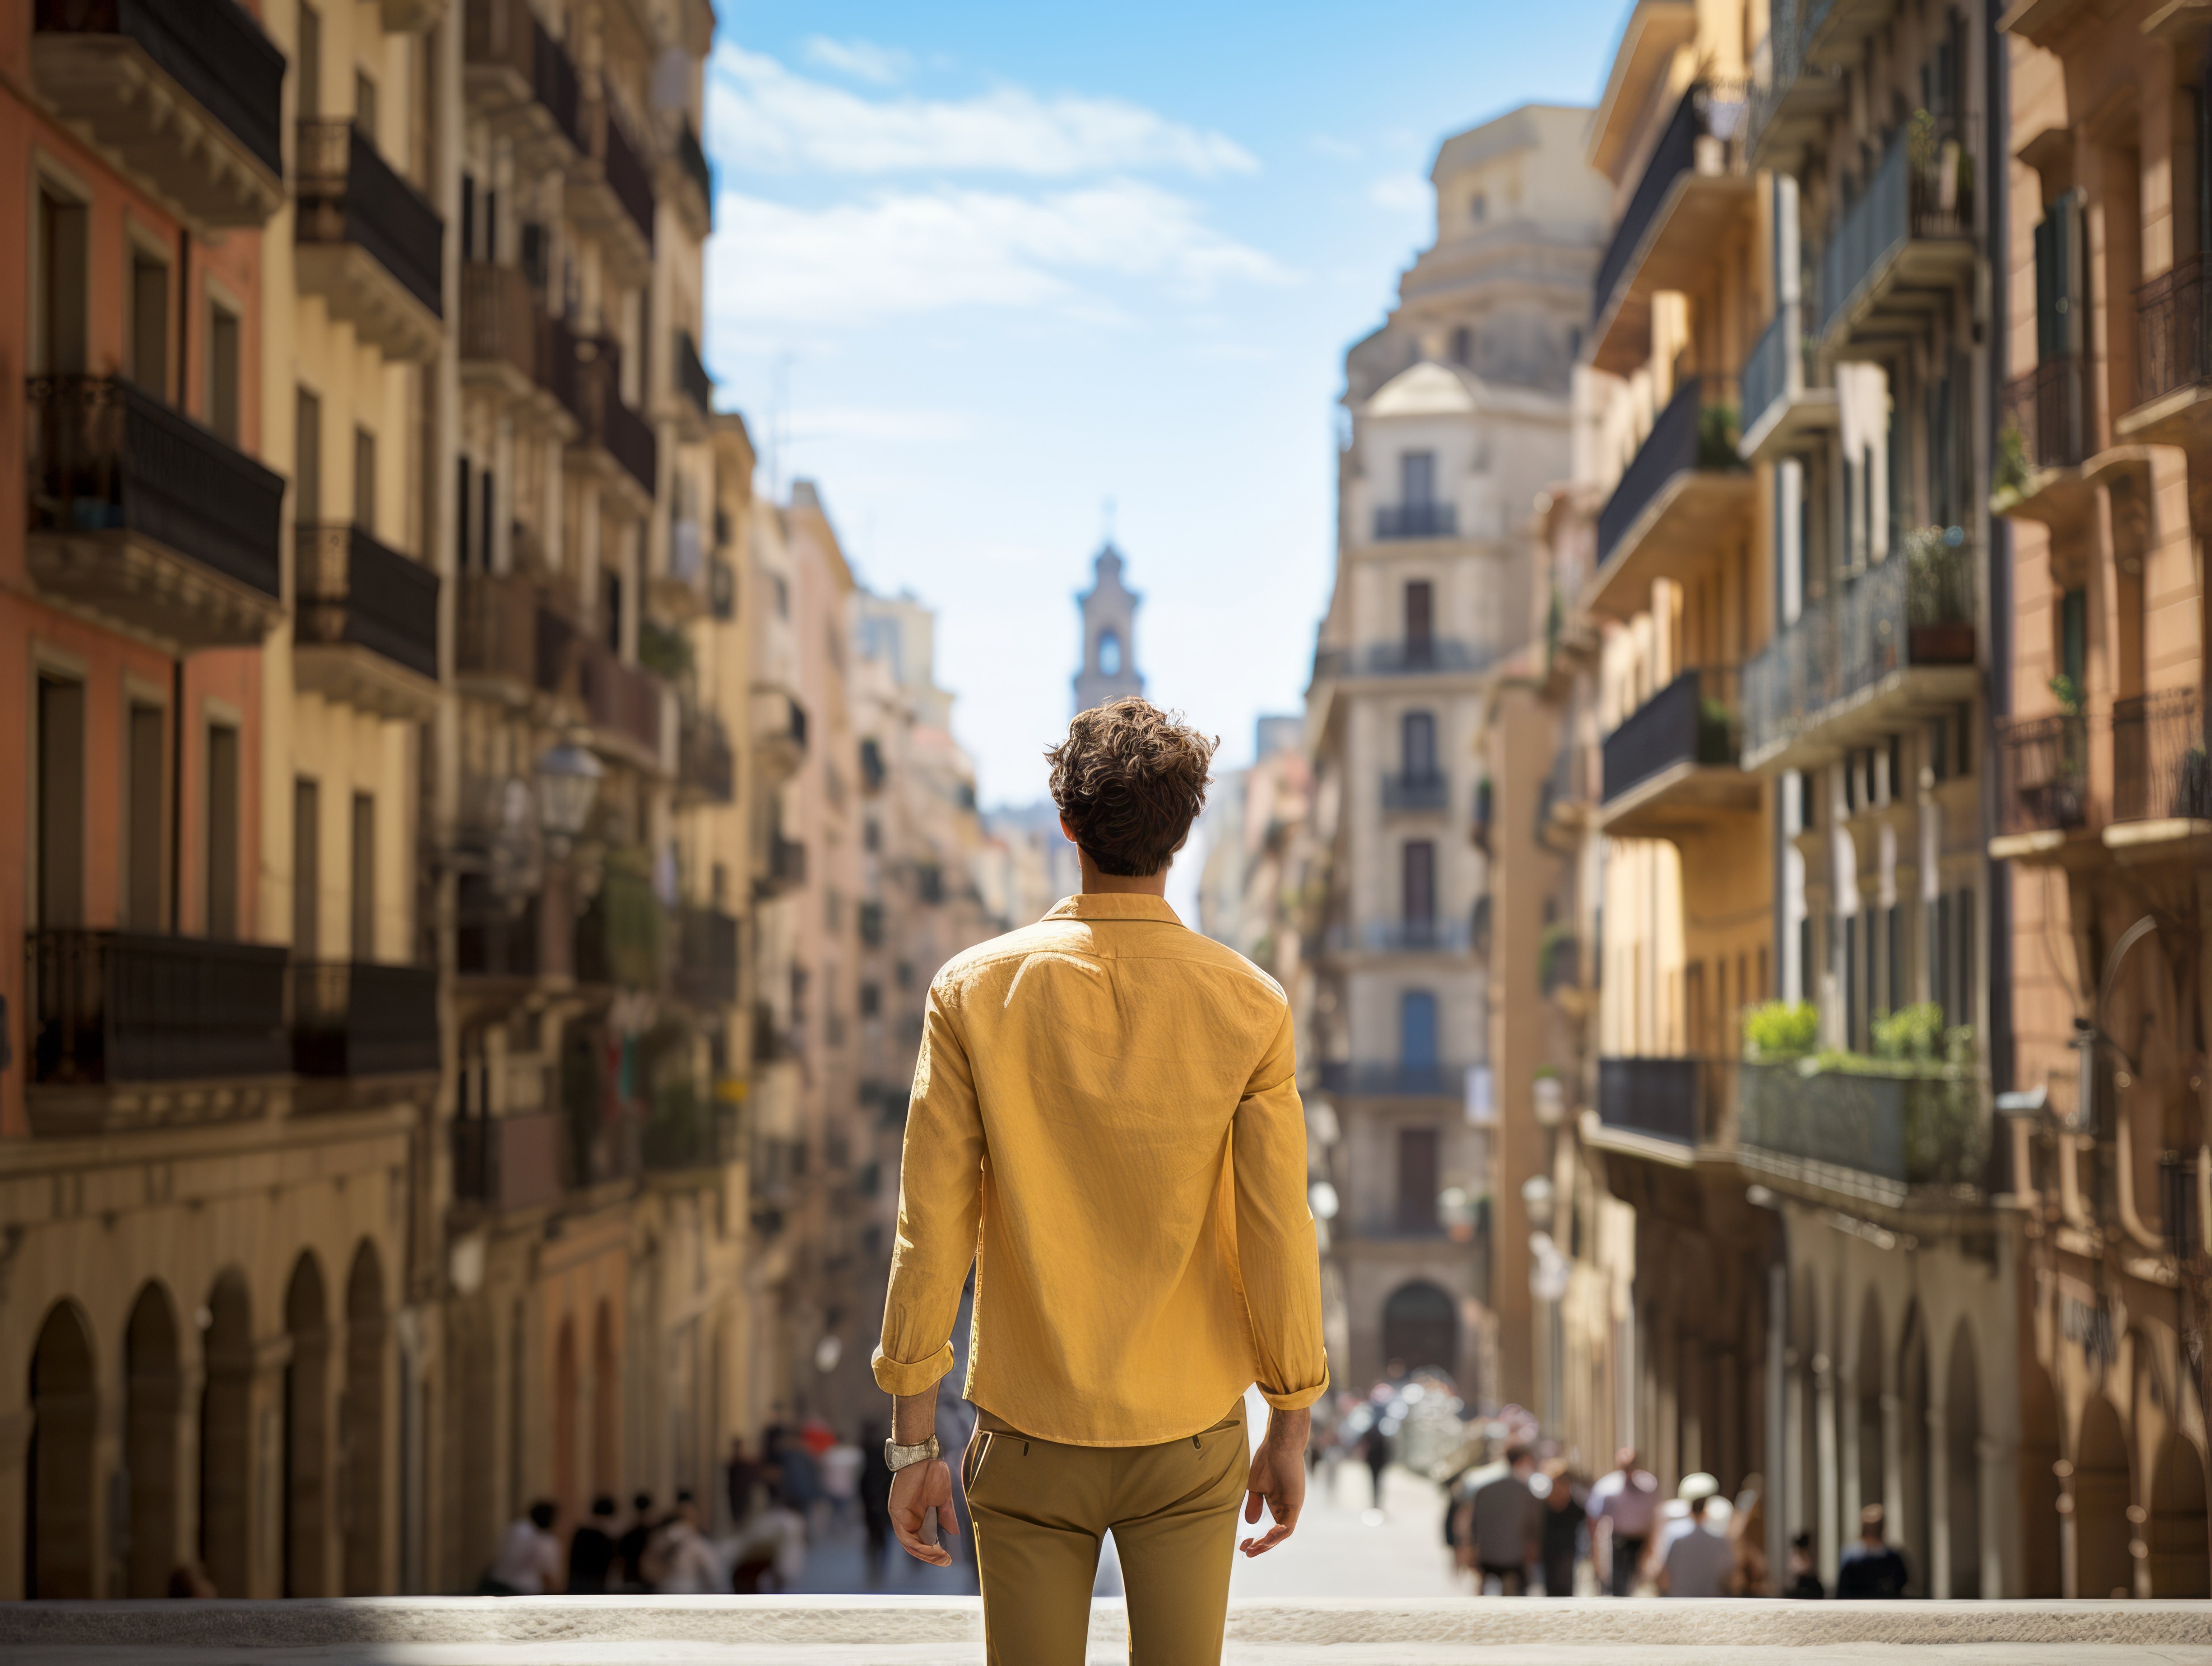 Insider exploring a vibrant city - part of The Insider's Guide to Moving to Spain From Another Country